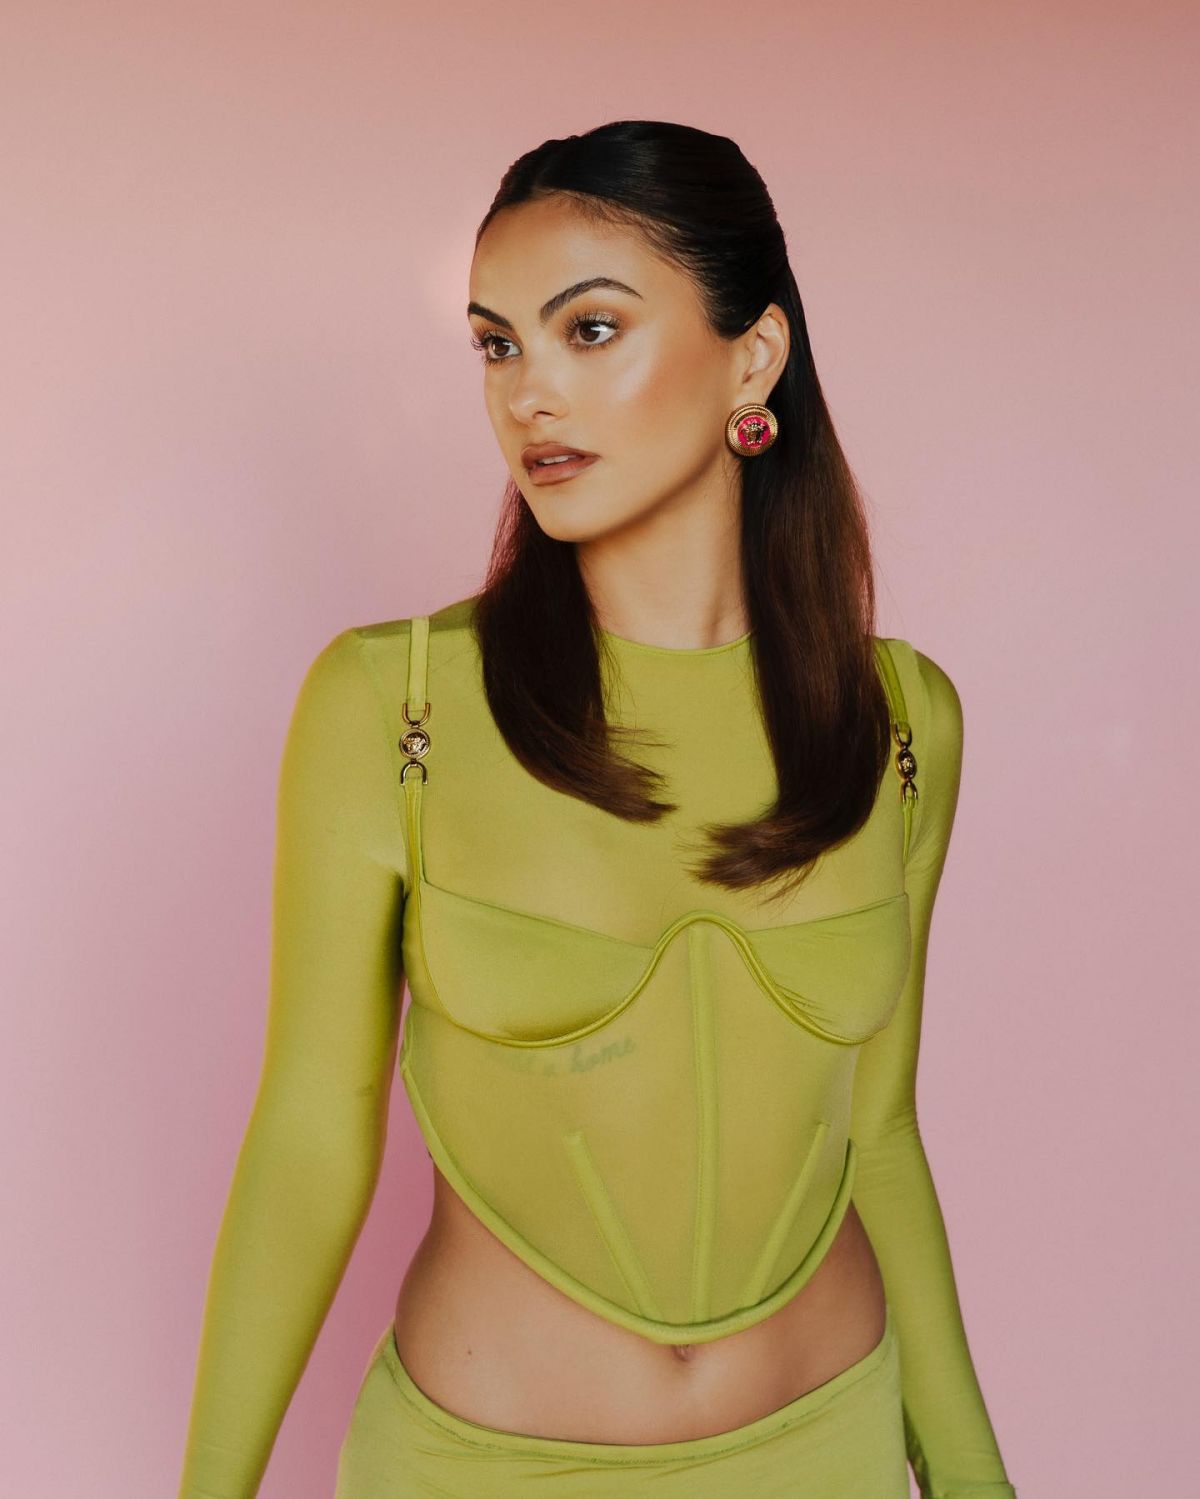 Camila Mendes seen in Versace Neon Stylish Dress at a Photoshoot 1